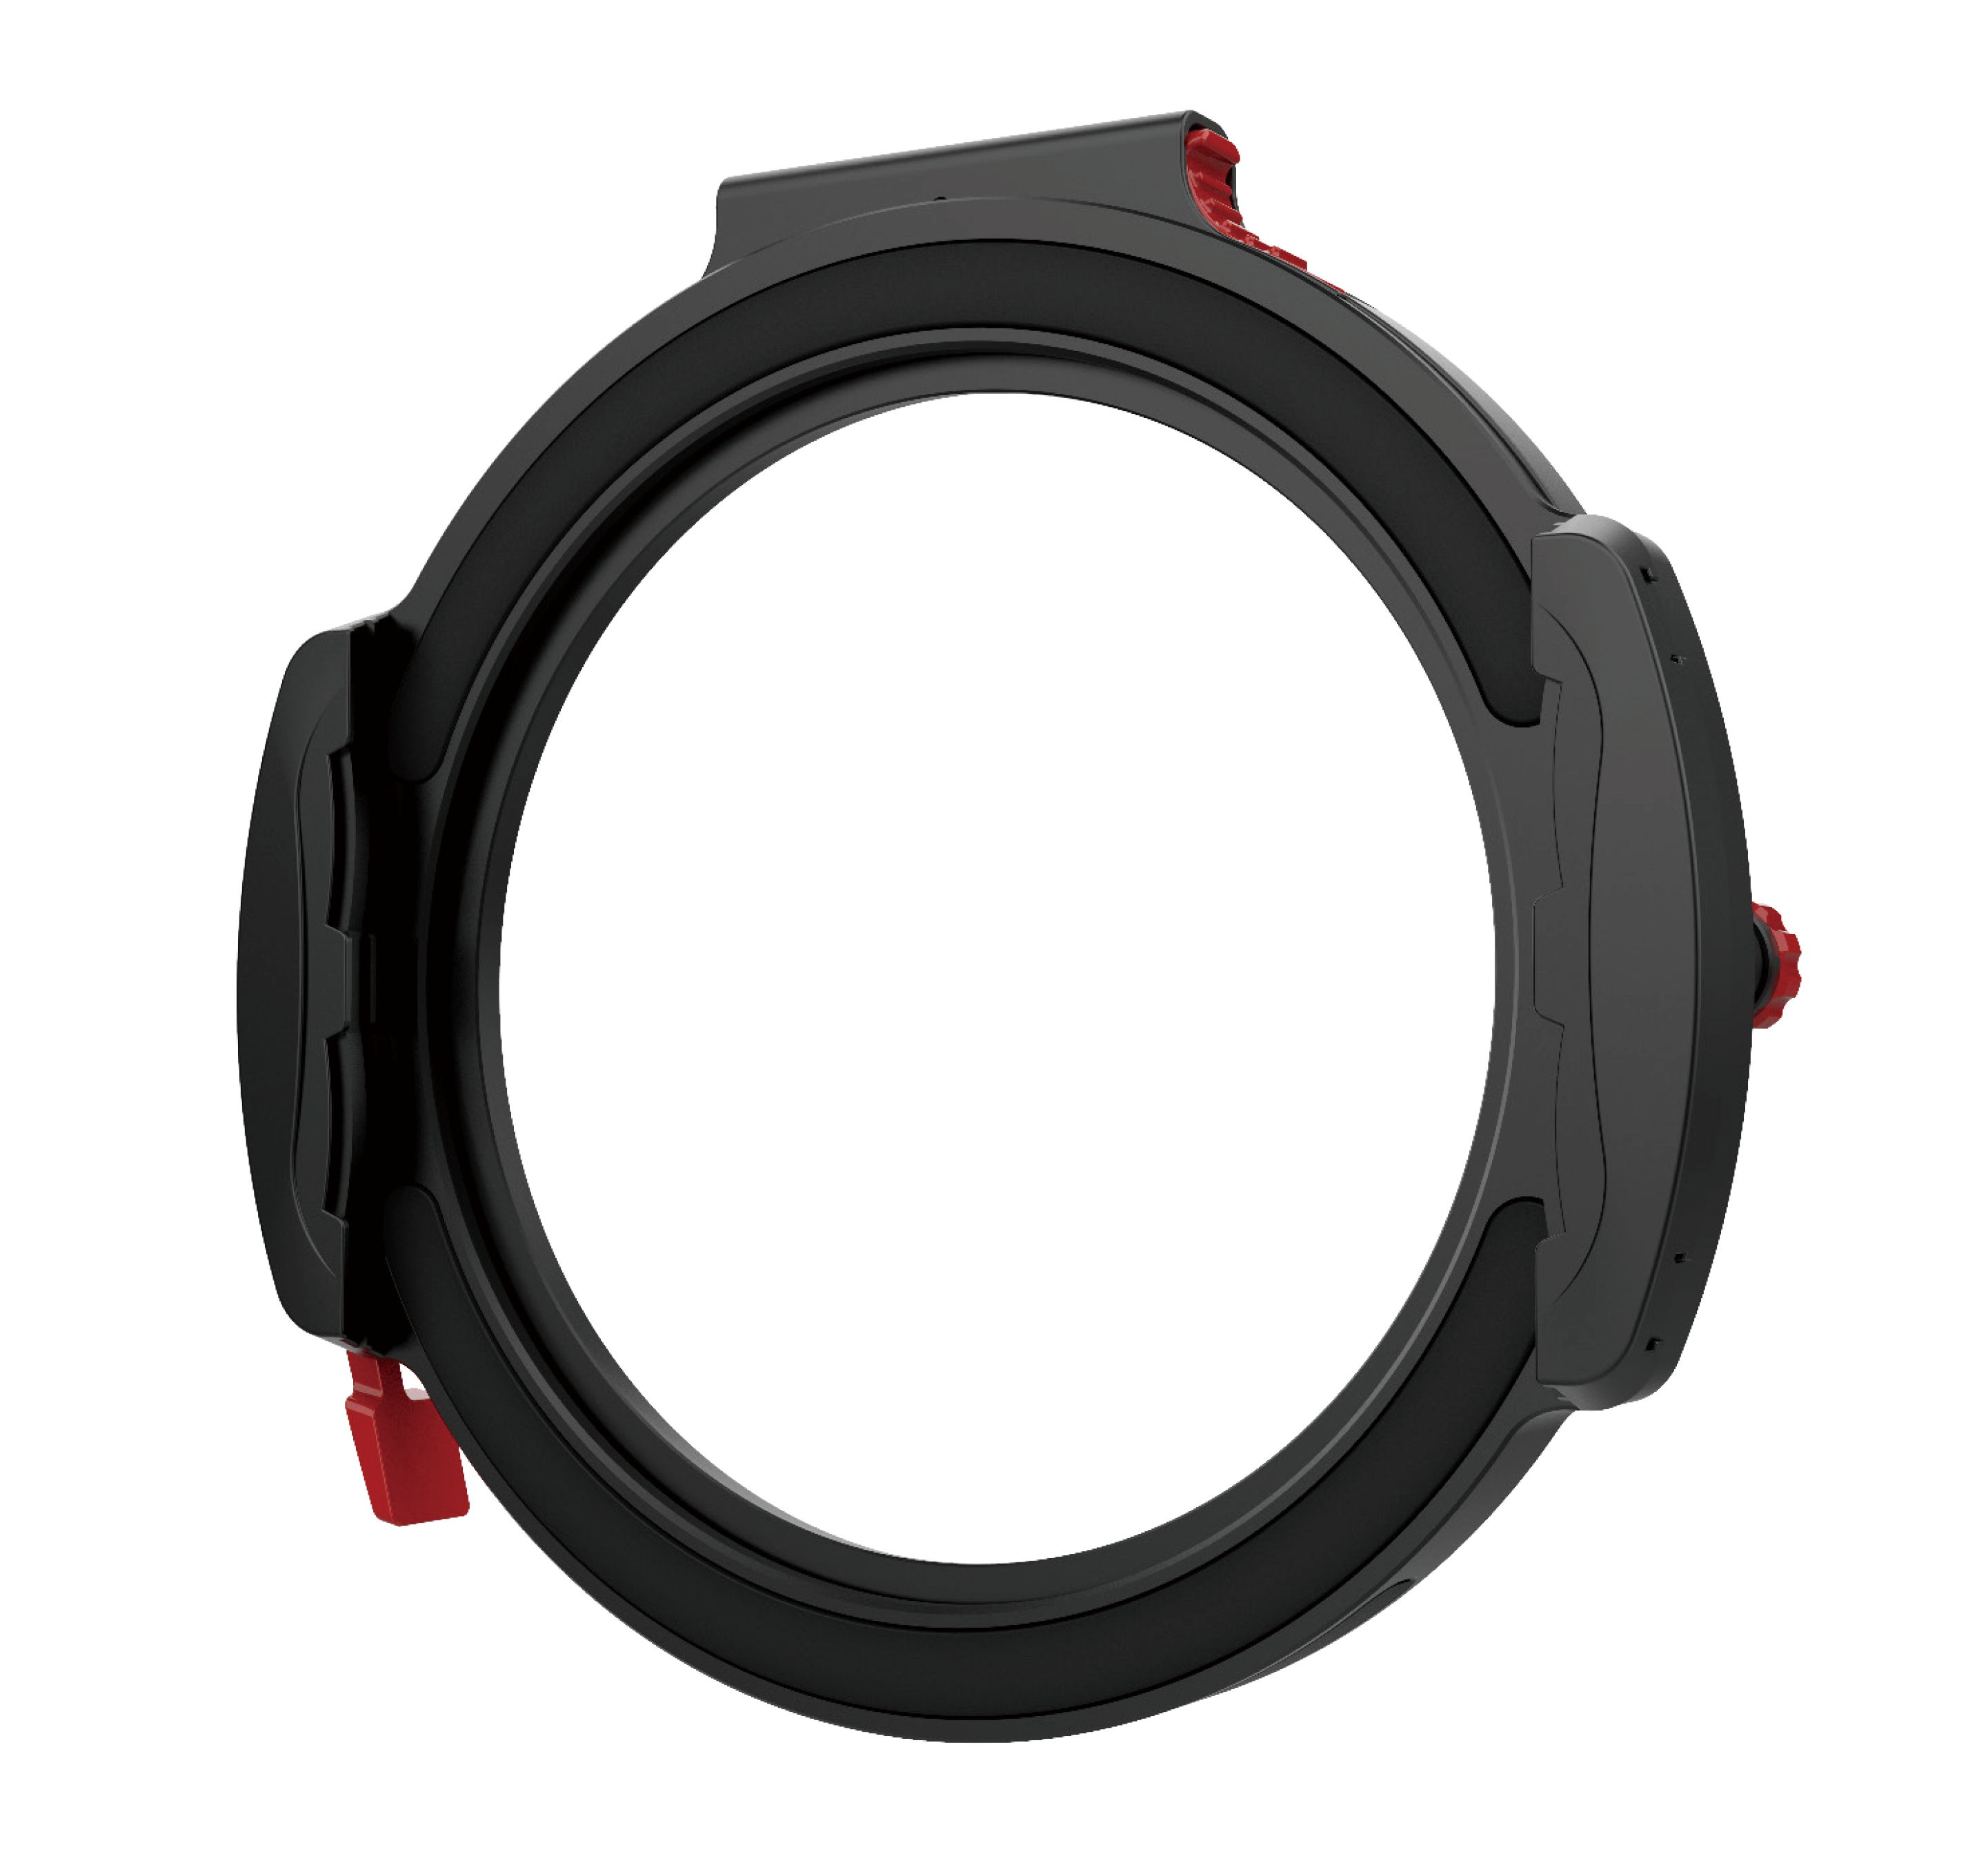 Haida M10 -II Filter Holder Kit for 100mm Series Filters With 52mm/58mm/67mm/72mm/77mm/82mm Adapter Ring